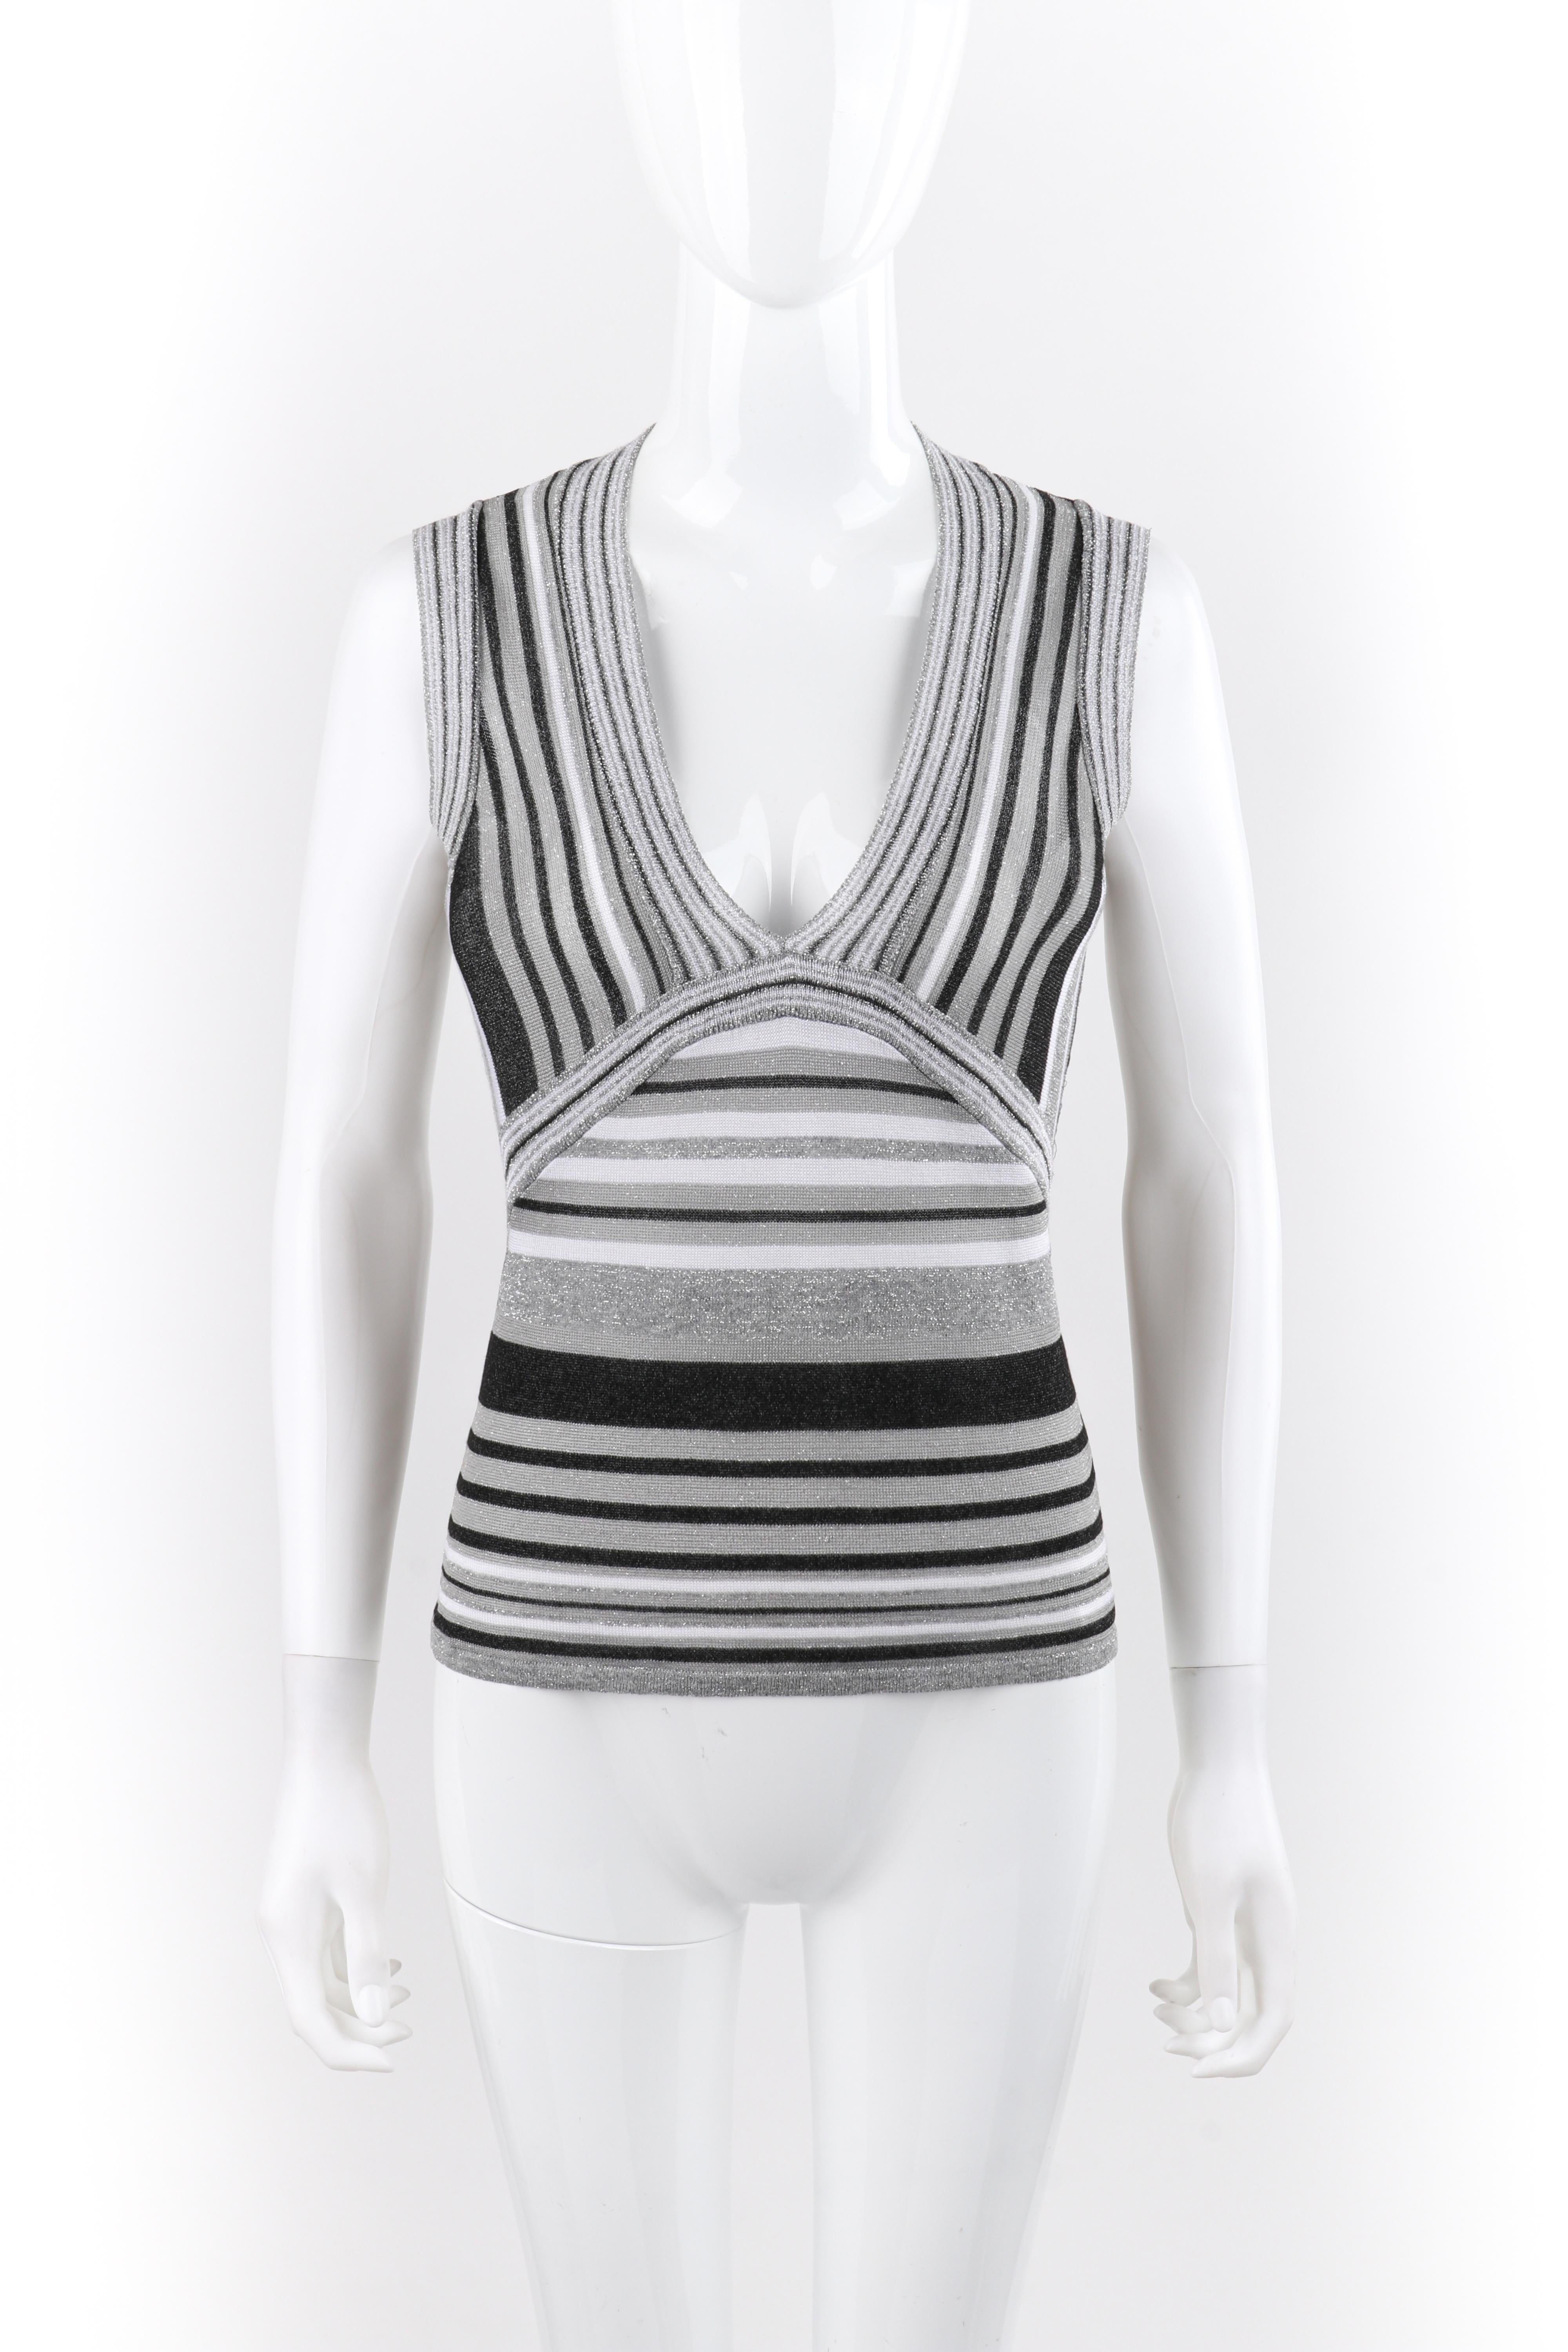 ALEXANDER McQUEEN S/S 1996 “The Hunger” Metallic Striped V-Neck Knit Tank Top
 
Brand / Manufacturer: Alexander McQueen 
Collection: S/S 1996 “The Hunger”
Designer: Alexander McQueen
Style: Sleeveless knit top
Color(s): Shades of silver, gray,